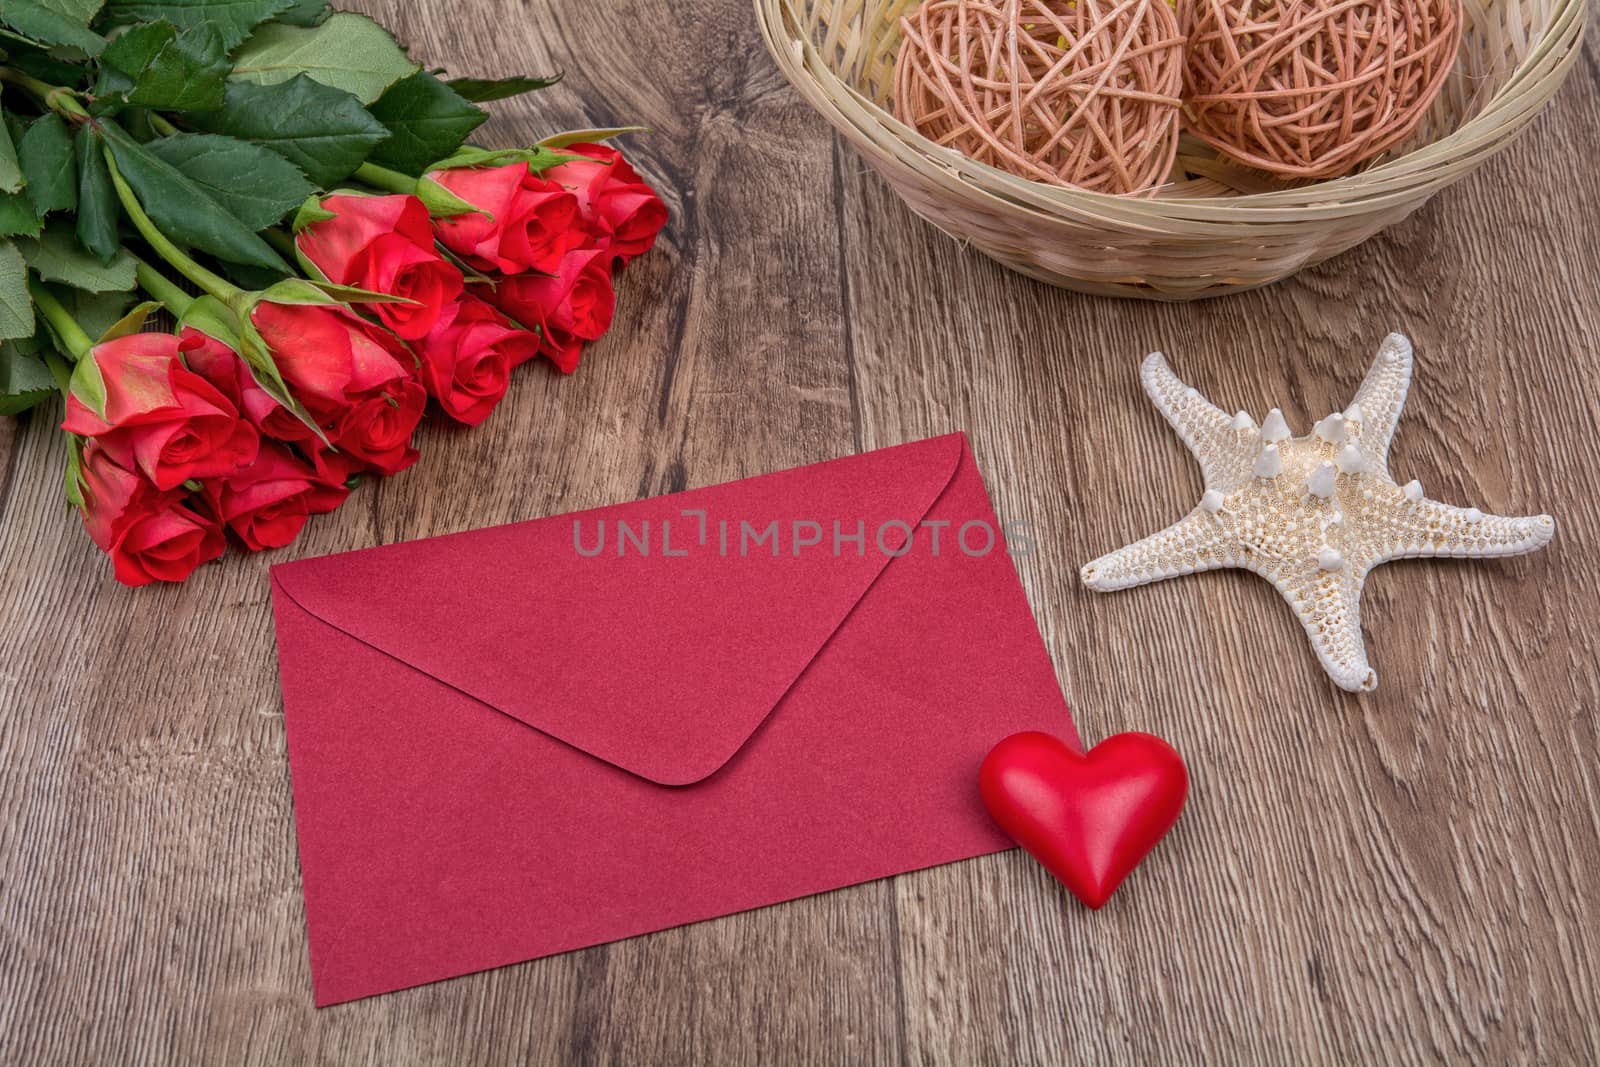 Red envelope, red roses and white starfish on a wooden background